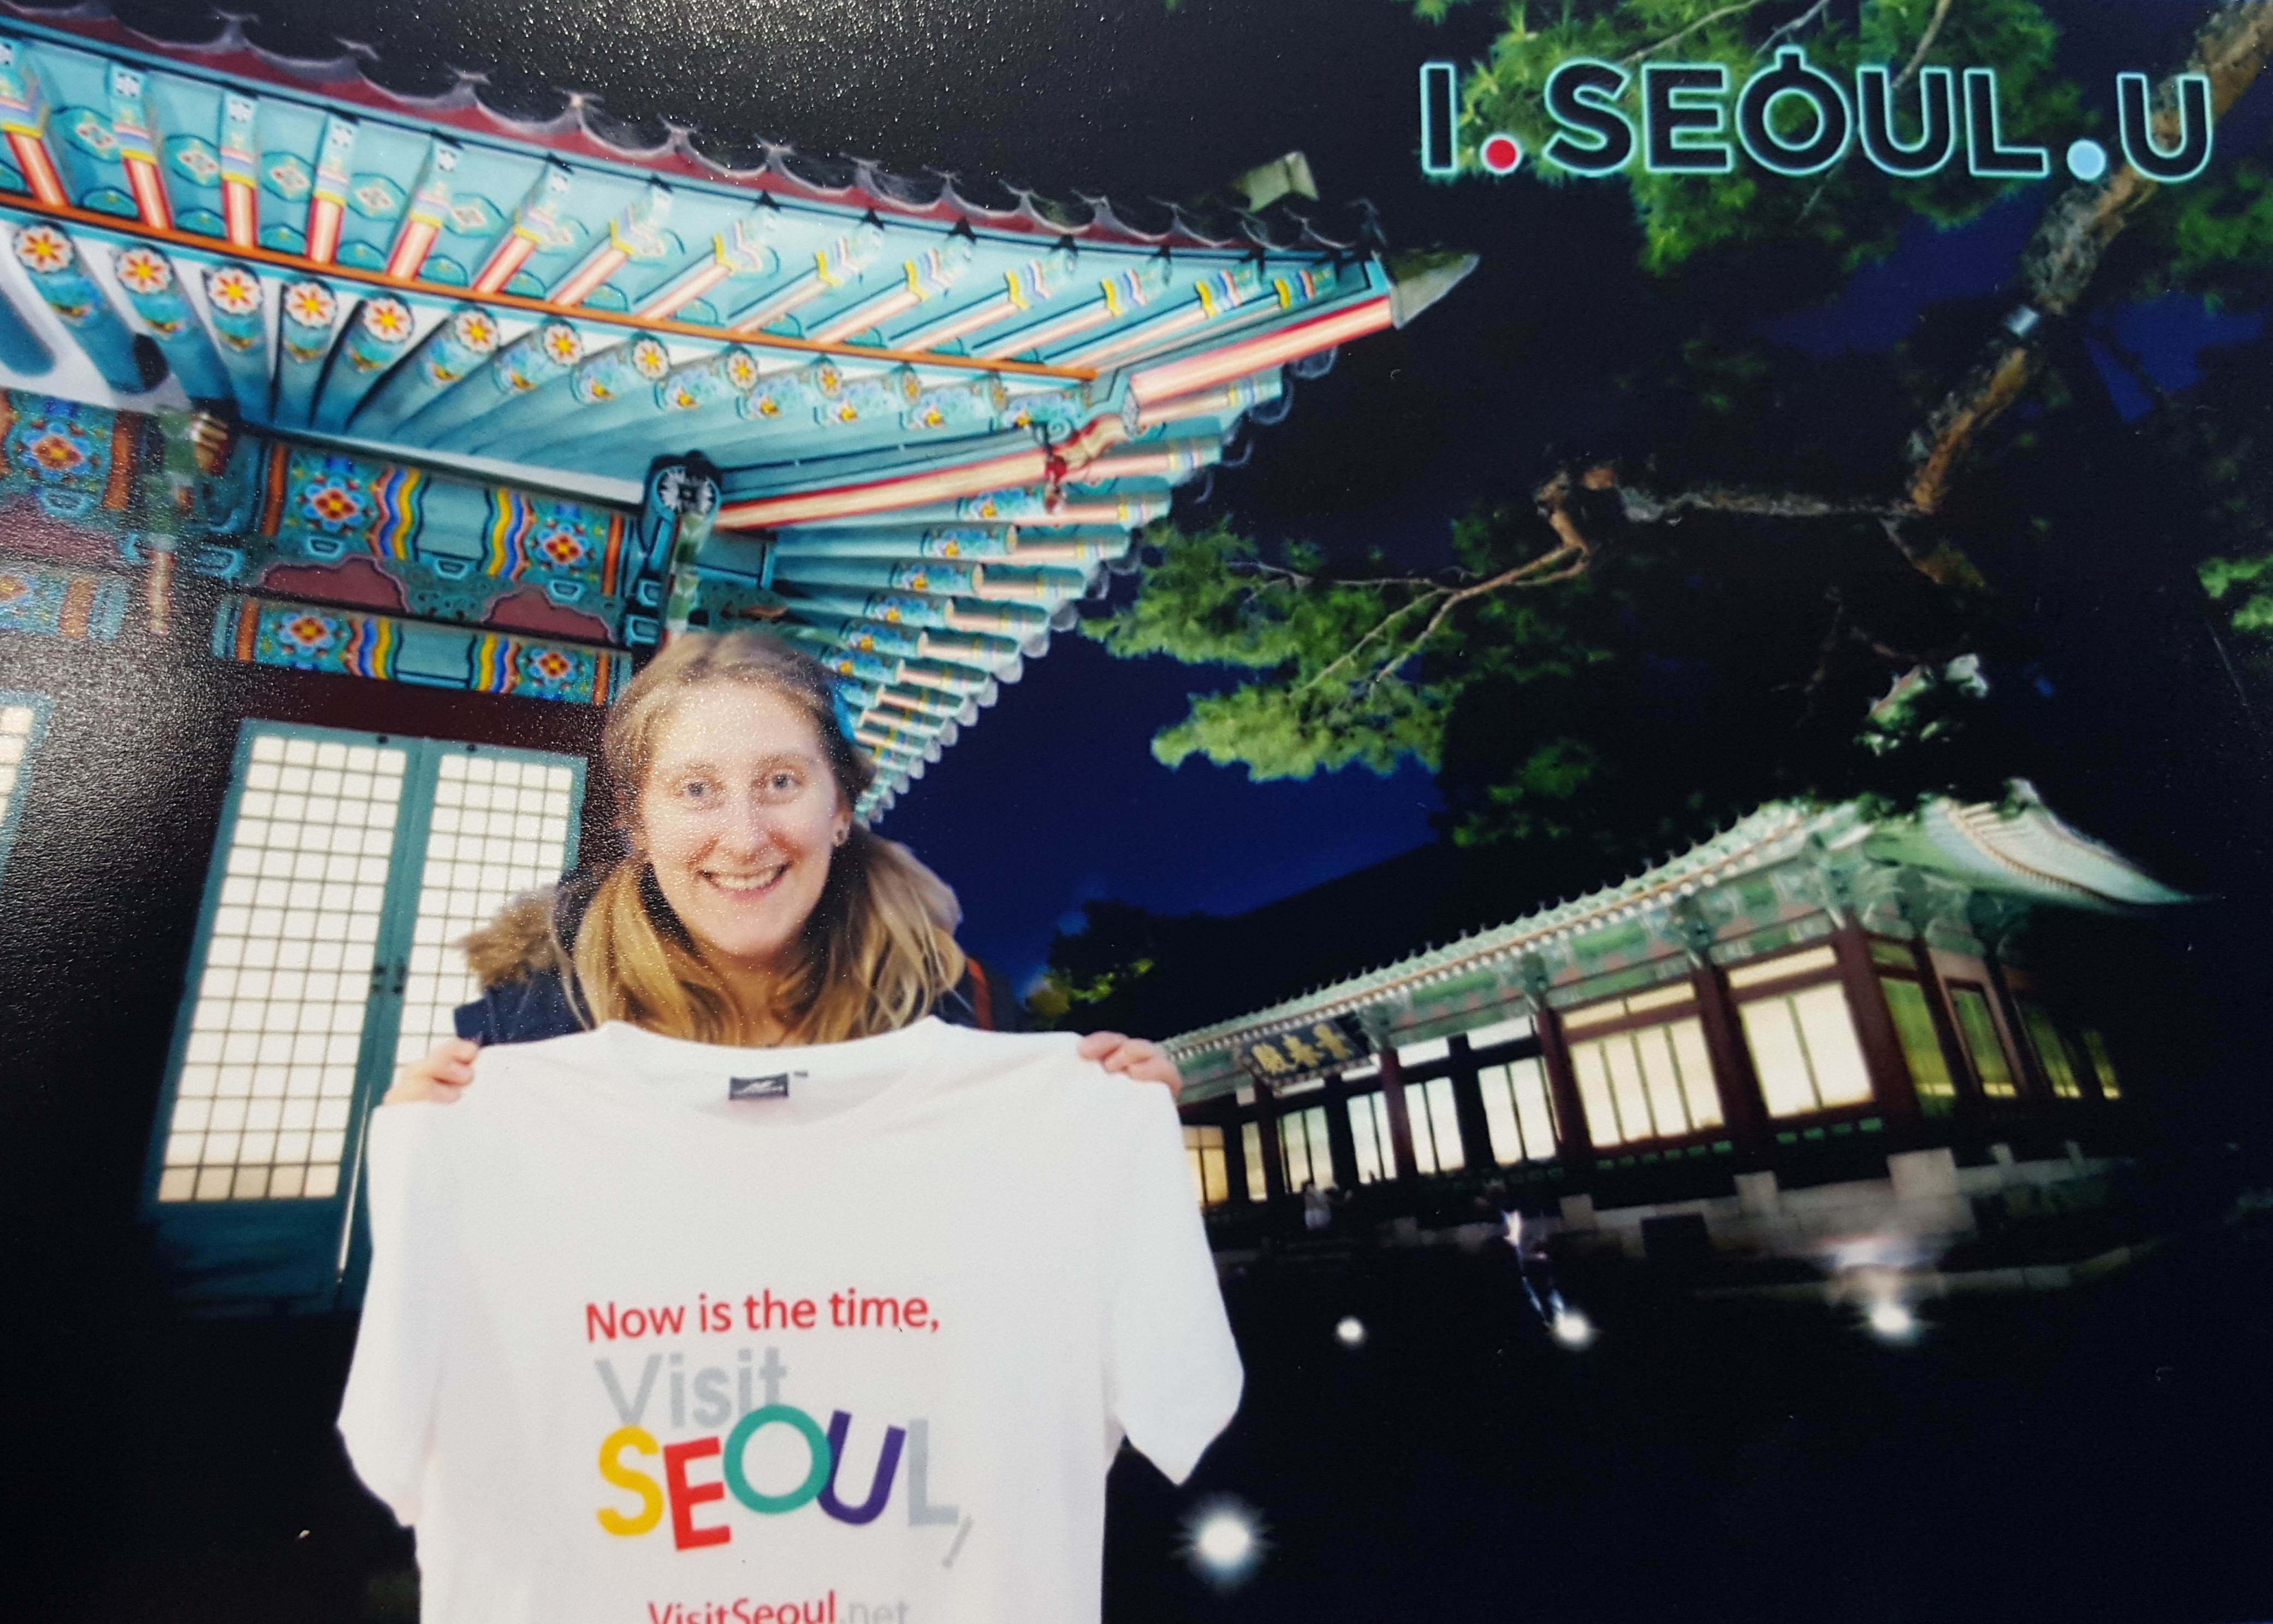 Seoul: old times, new times, dangerous times, tasty times